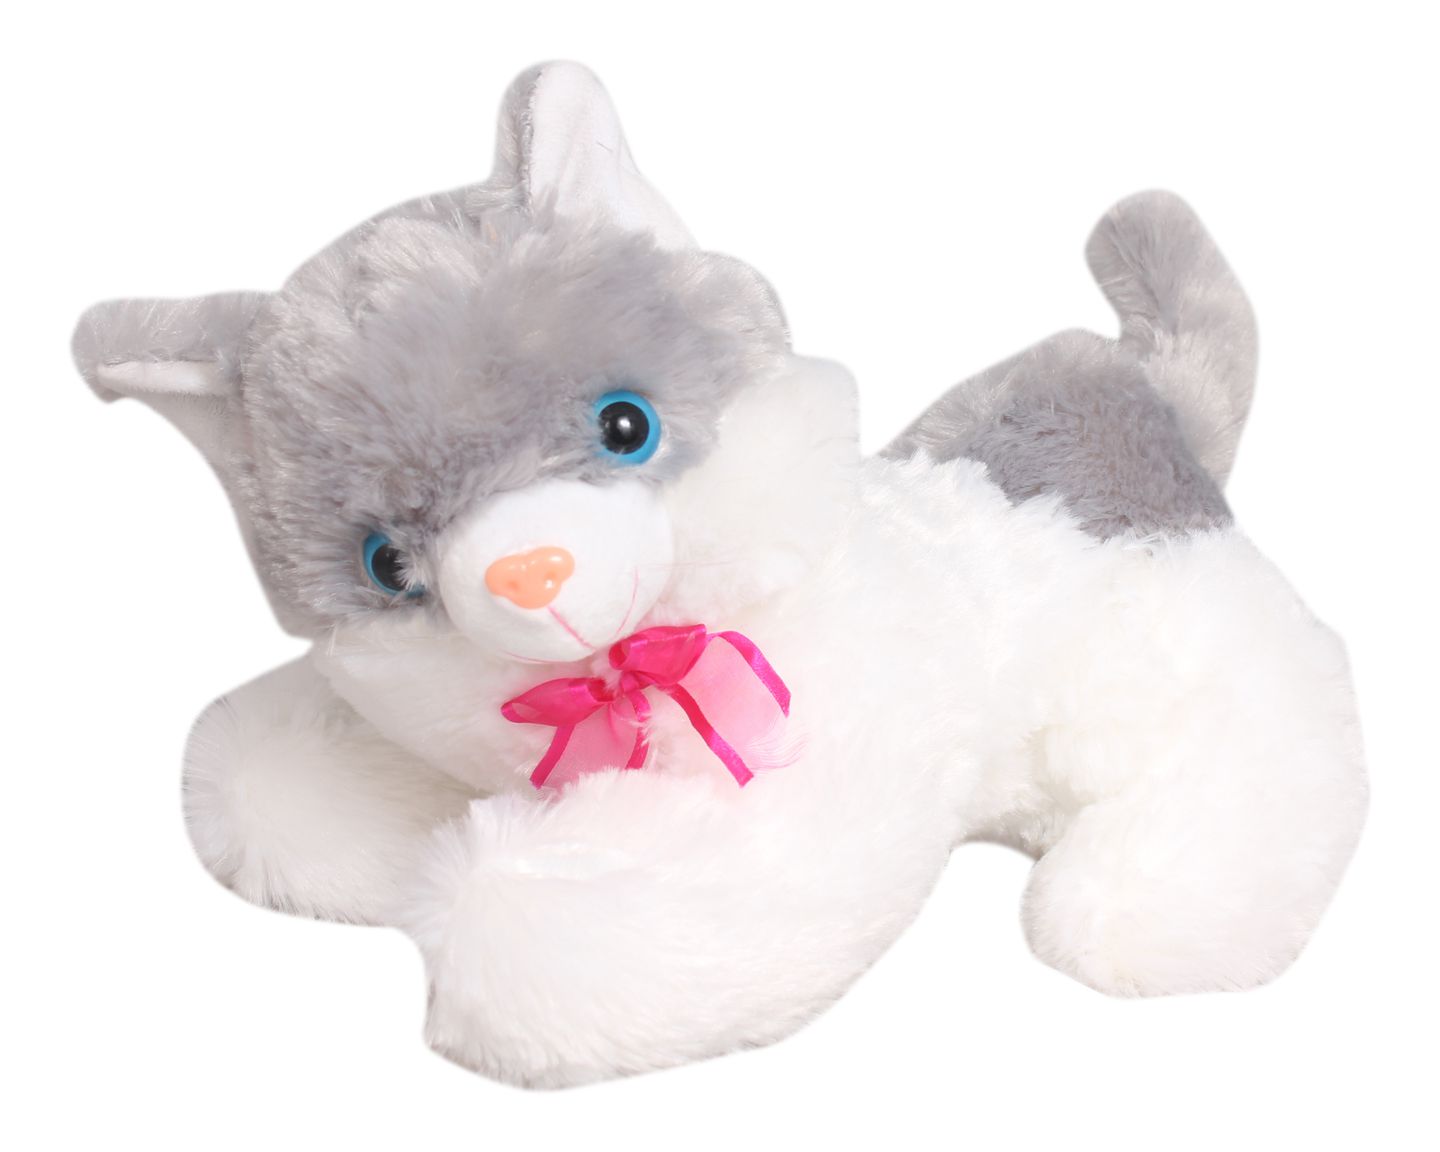     			Tickles Lovely Soft Cat Soft Stuffed Plush Animal Toy for Kids (Color:Grey Size: 30 cm )